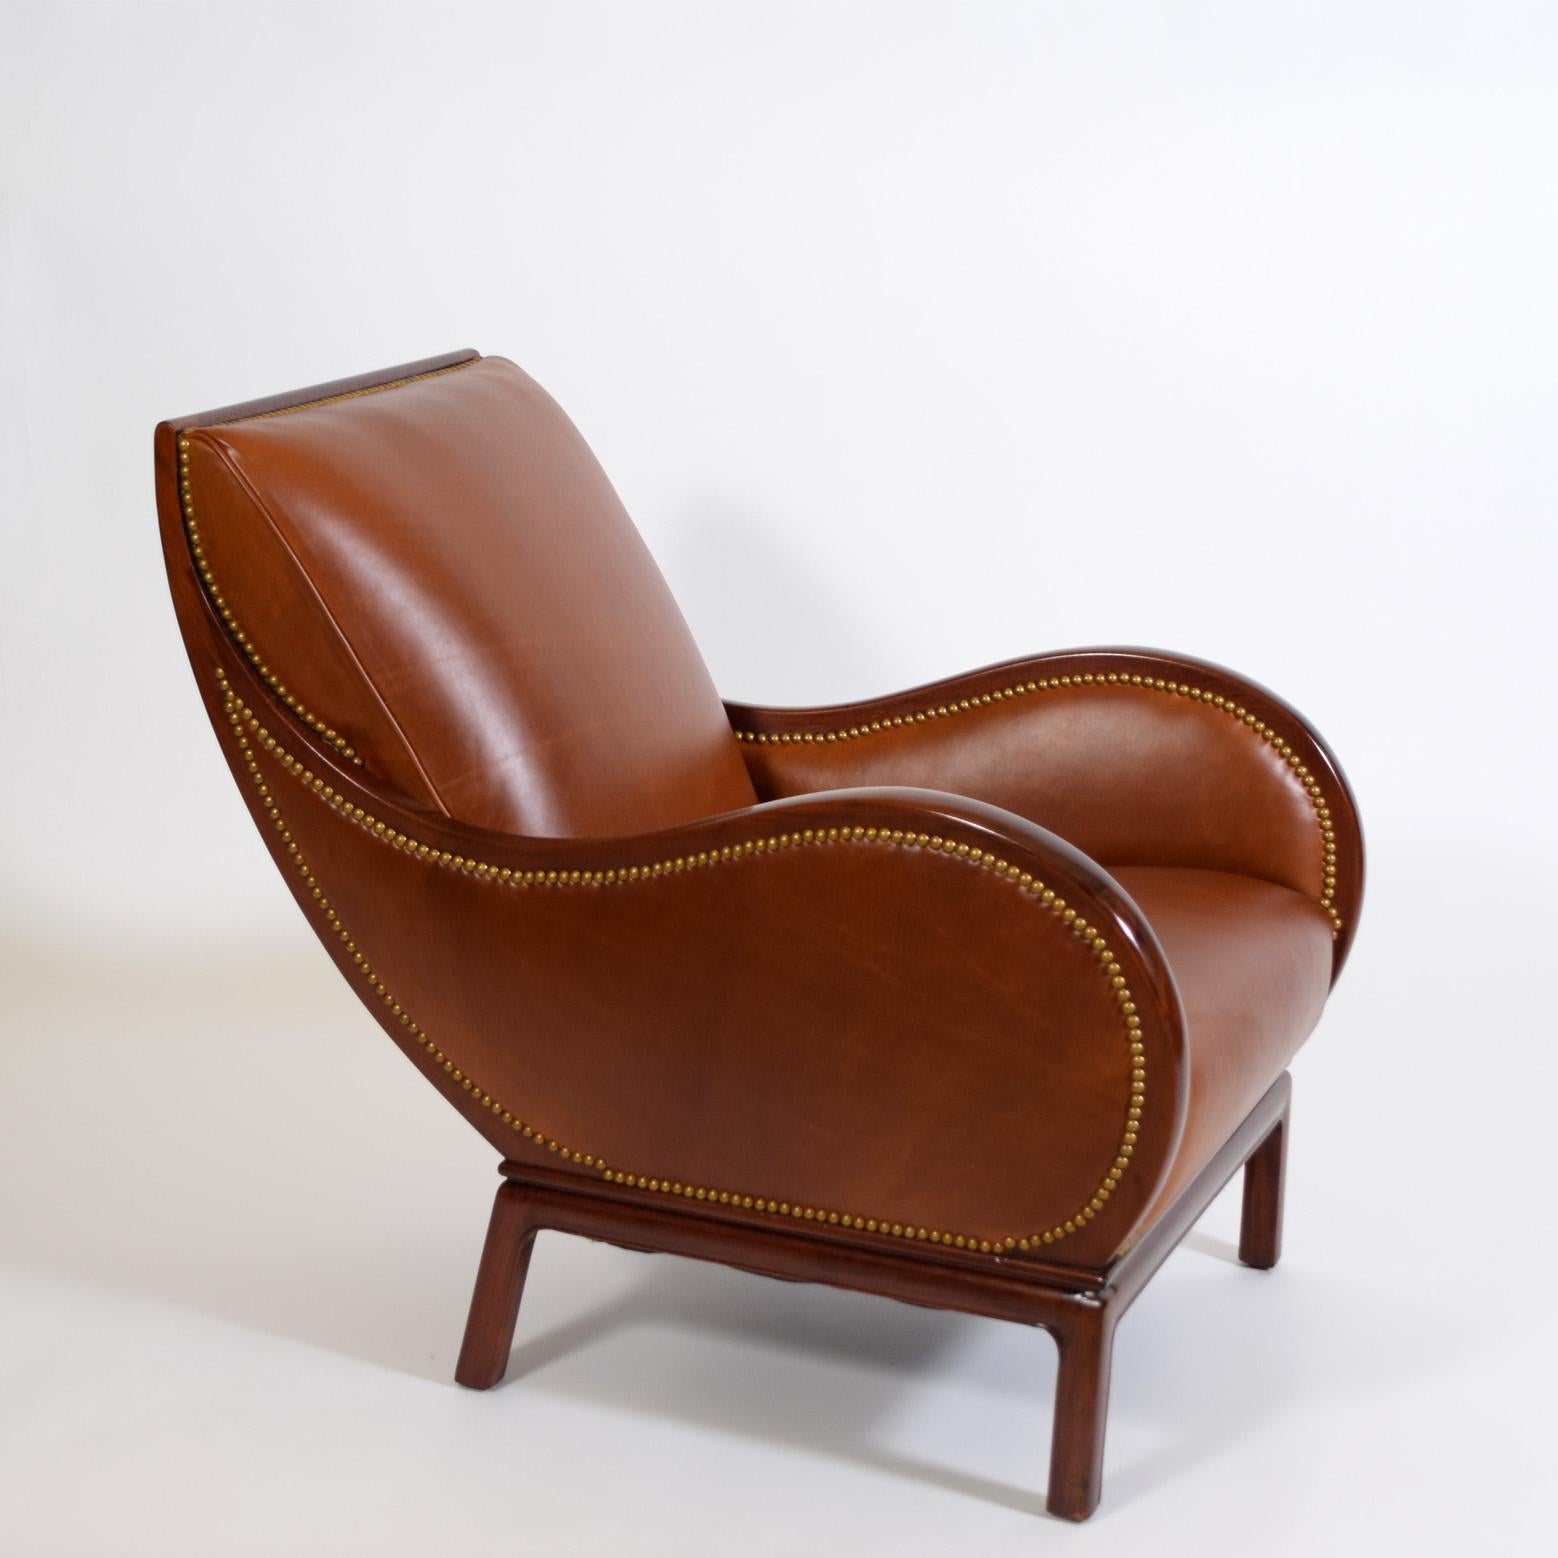 Very unique and early lounge chair by Danish Modern Designer, Frits 
Henningsen.   Unusual stand-out form in the swirling curve of the arms and 
back, reupholstered in soft brown leather fitted with brass studs
Frits Henningsen (1889–1965) was a